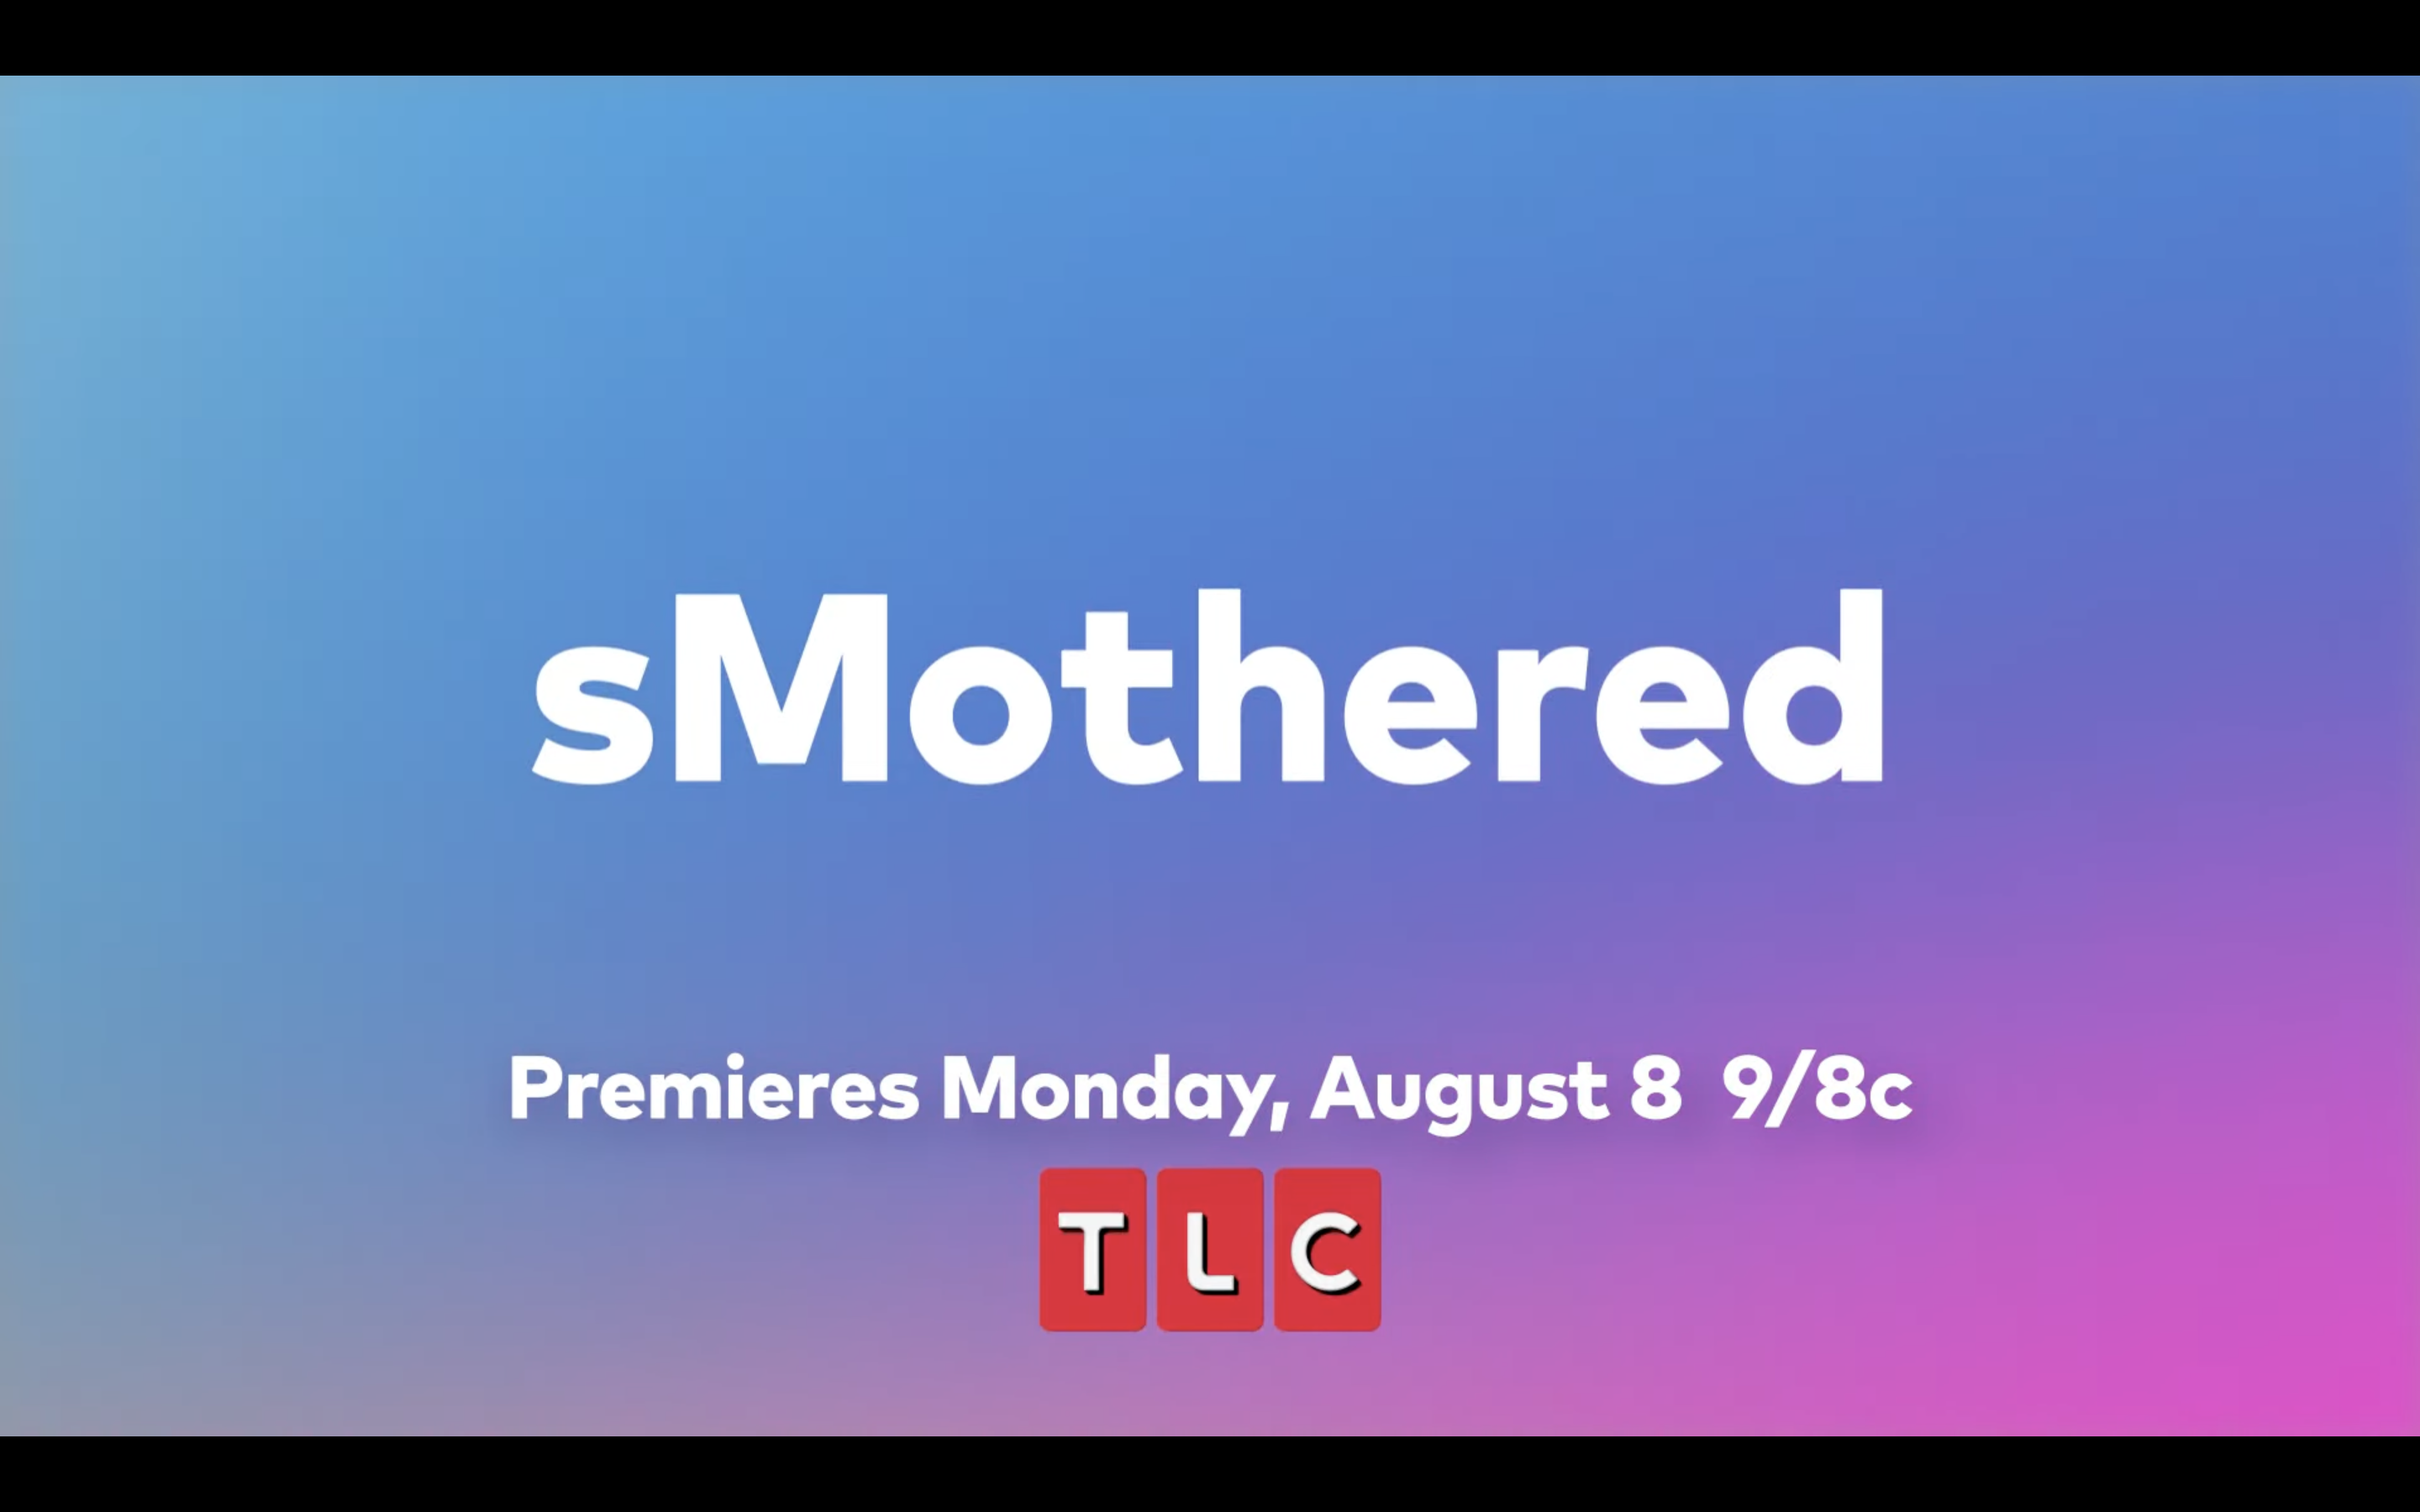 Inside Season 4 of TLC's 'sMothered': 'We do everything naked